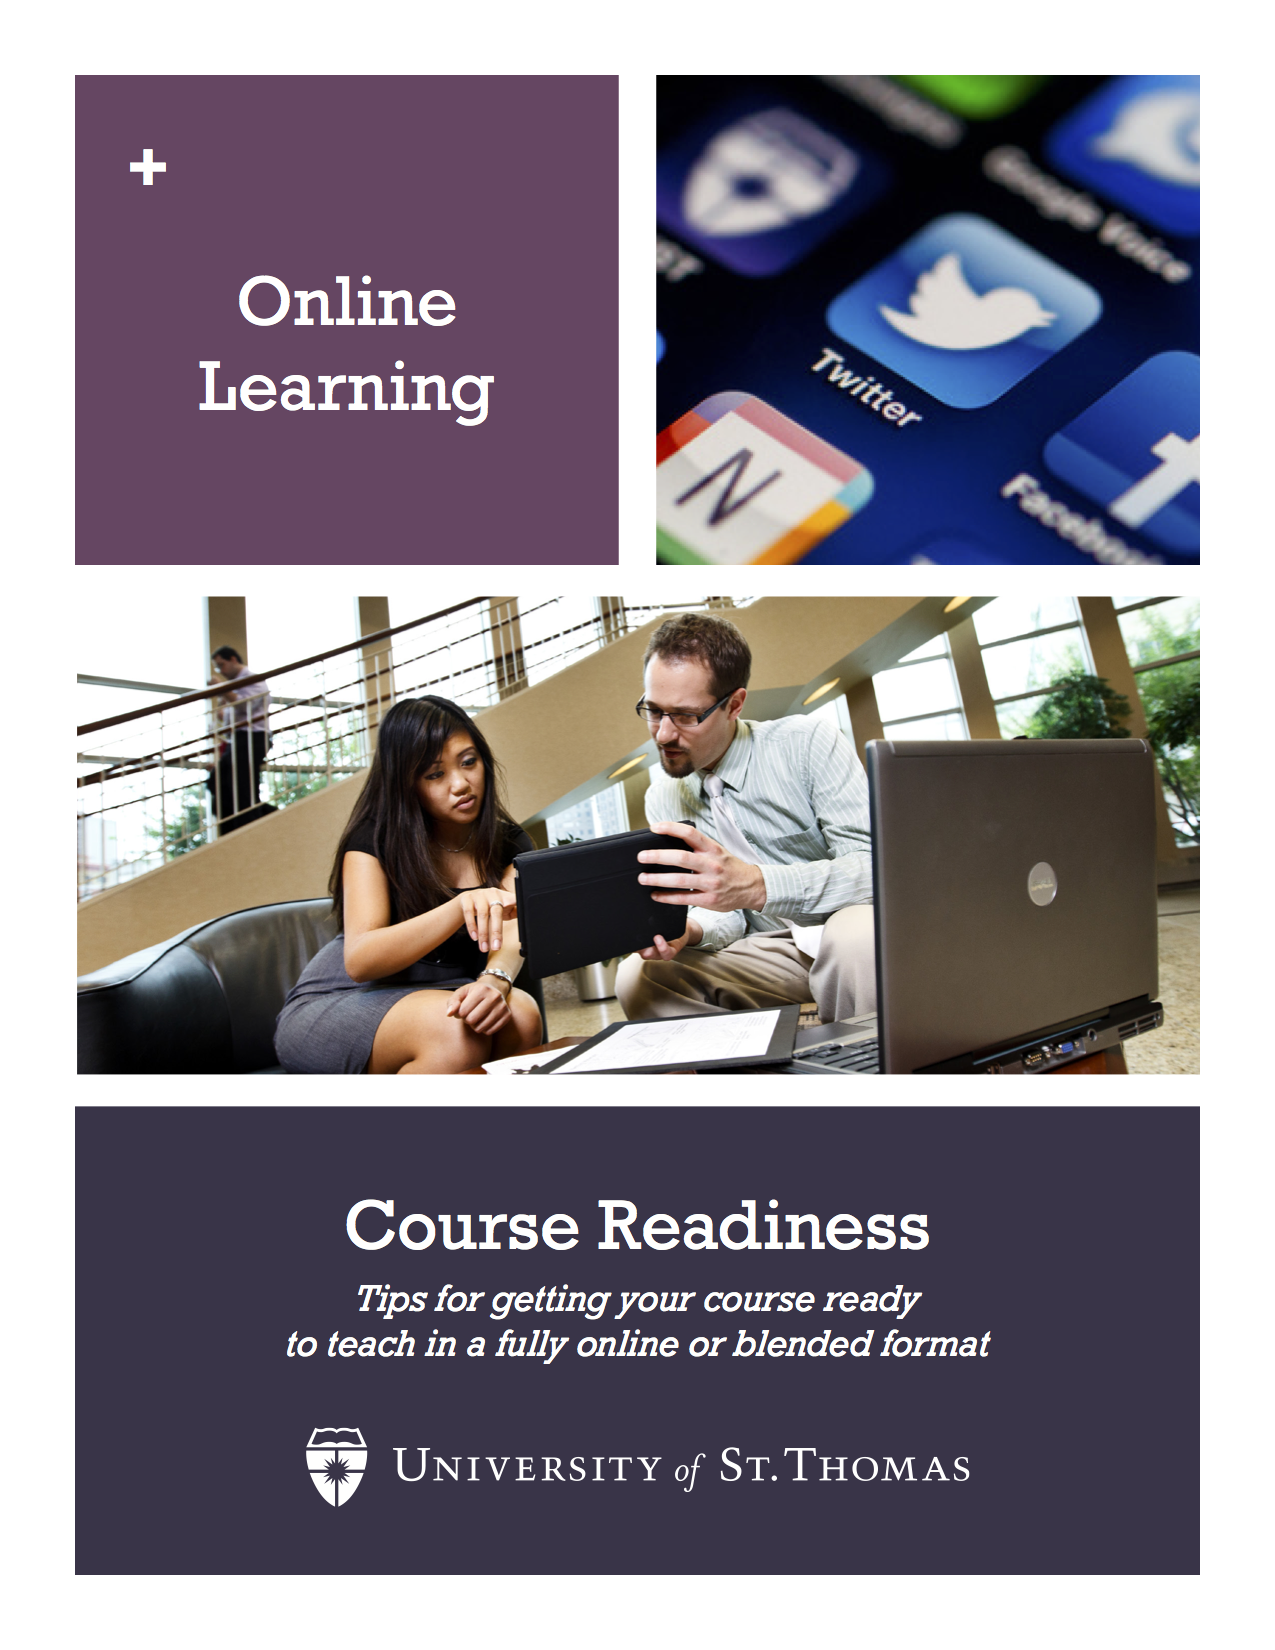 Course Readiness Guide